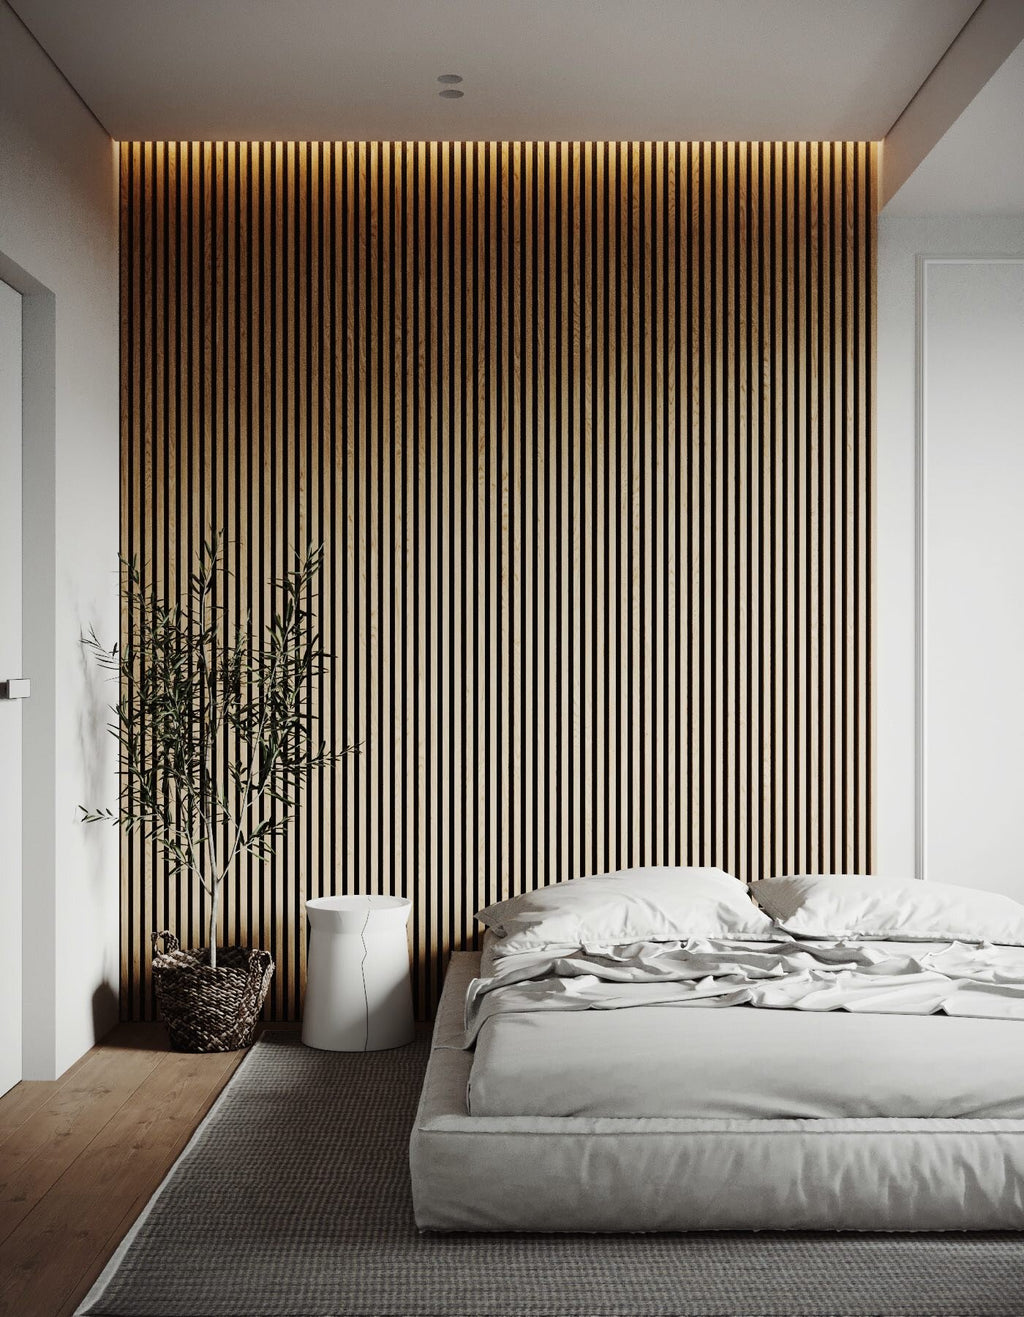 Upgrade Your Walls With This Trendy Multi-dimensional Look We're Seeing Everywhere